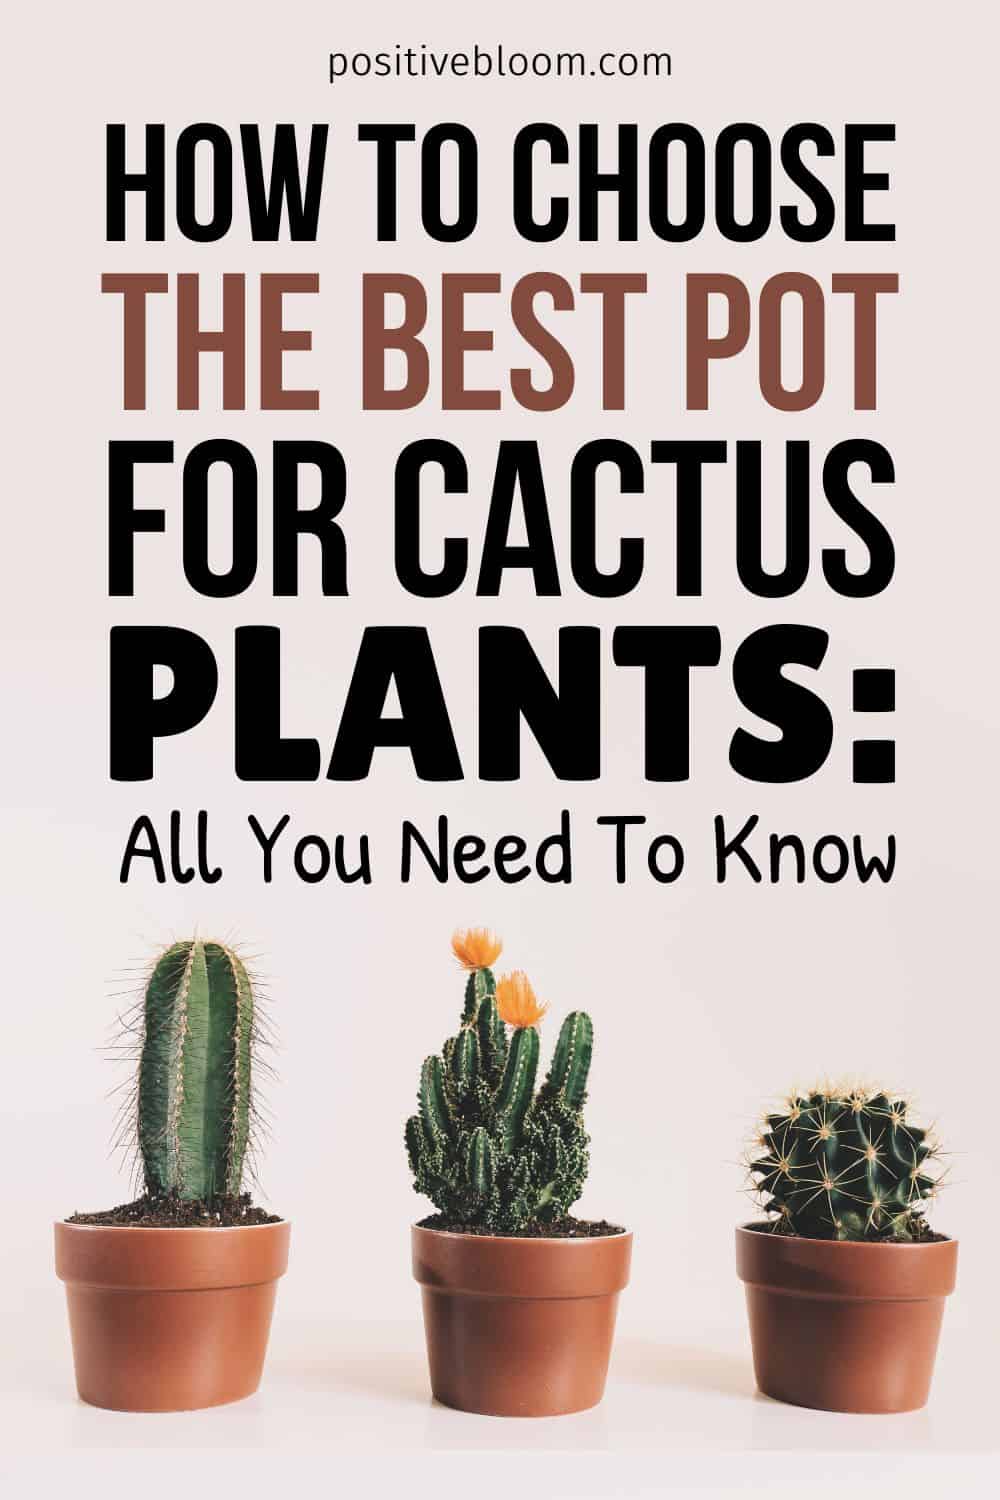 How To Choose The Best Pot For Cactus Plants All You Need To Know Pinterest